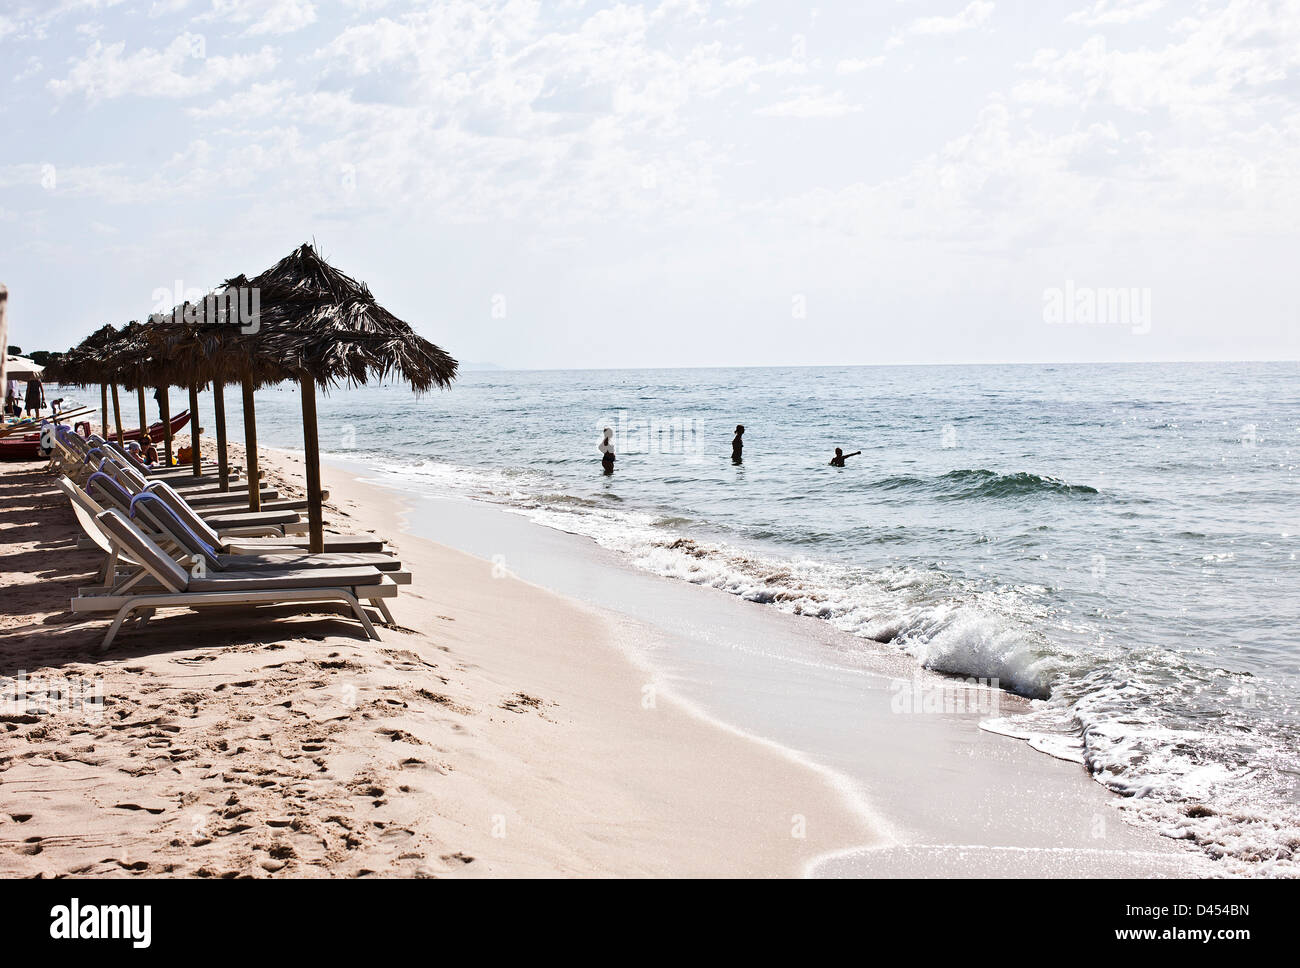 People in sea with parasols and sunloungers, Sardinia, Italy Stock Photo